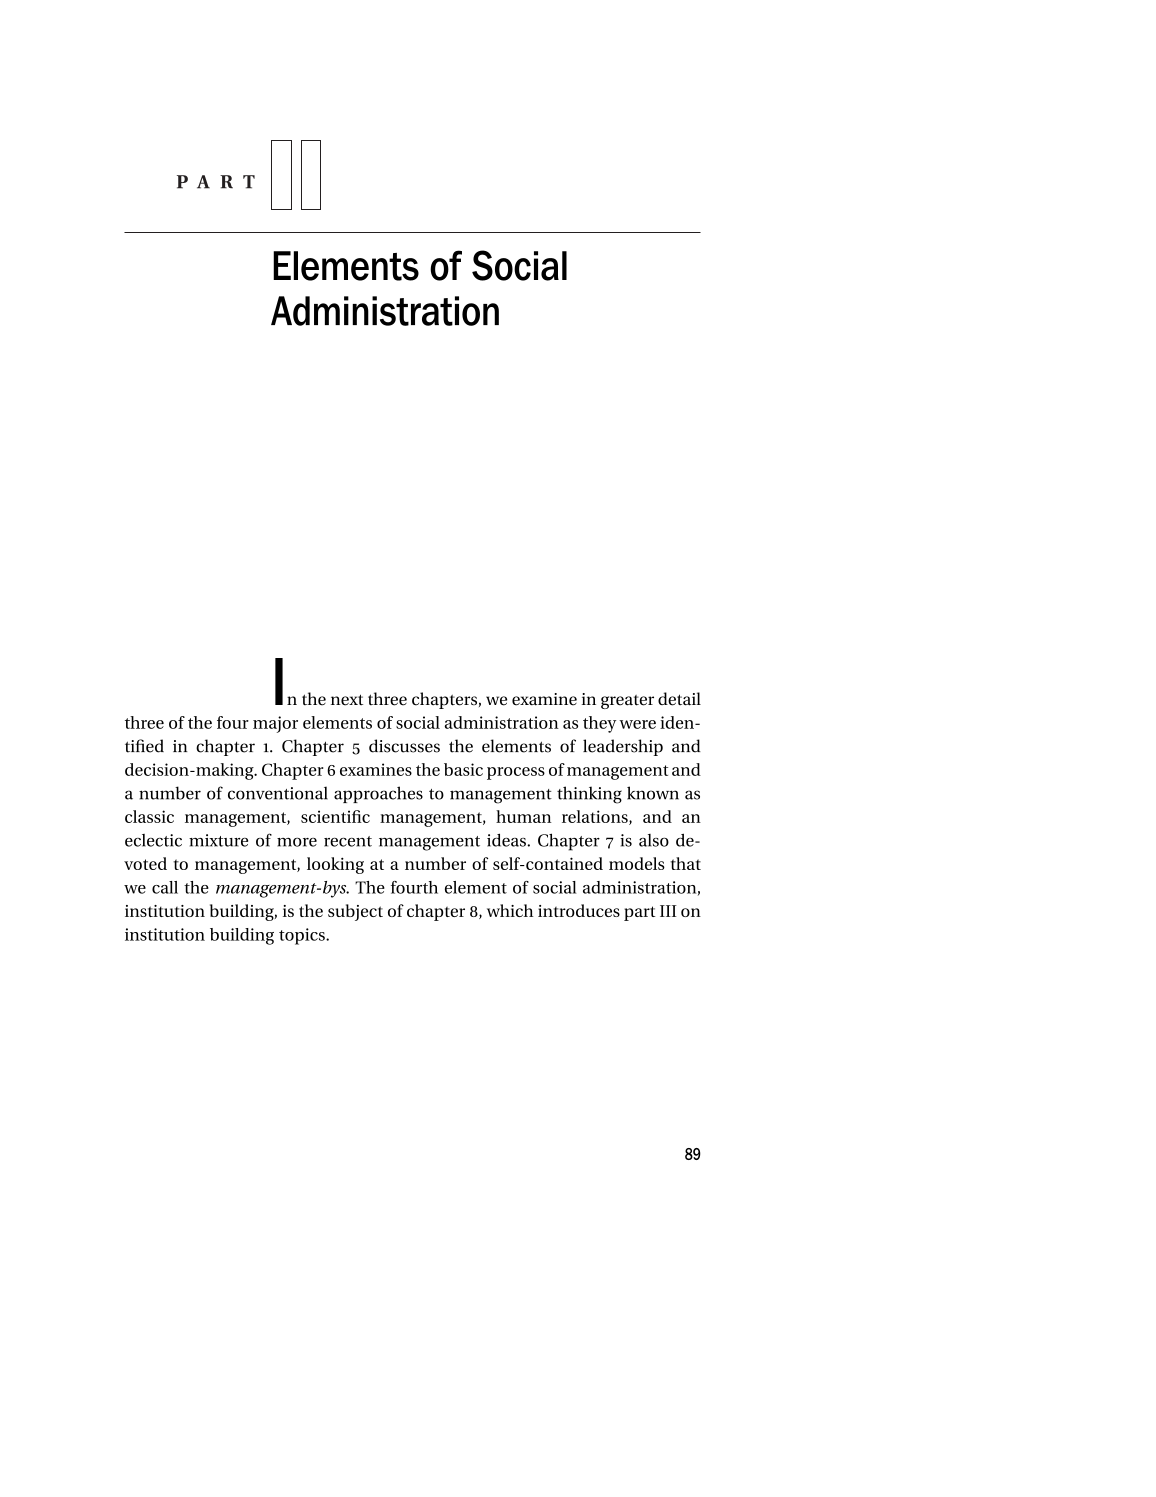 Social Administration page 89